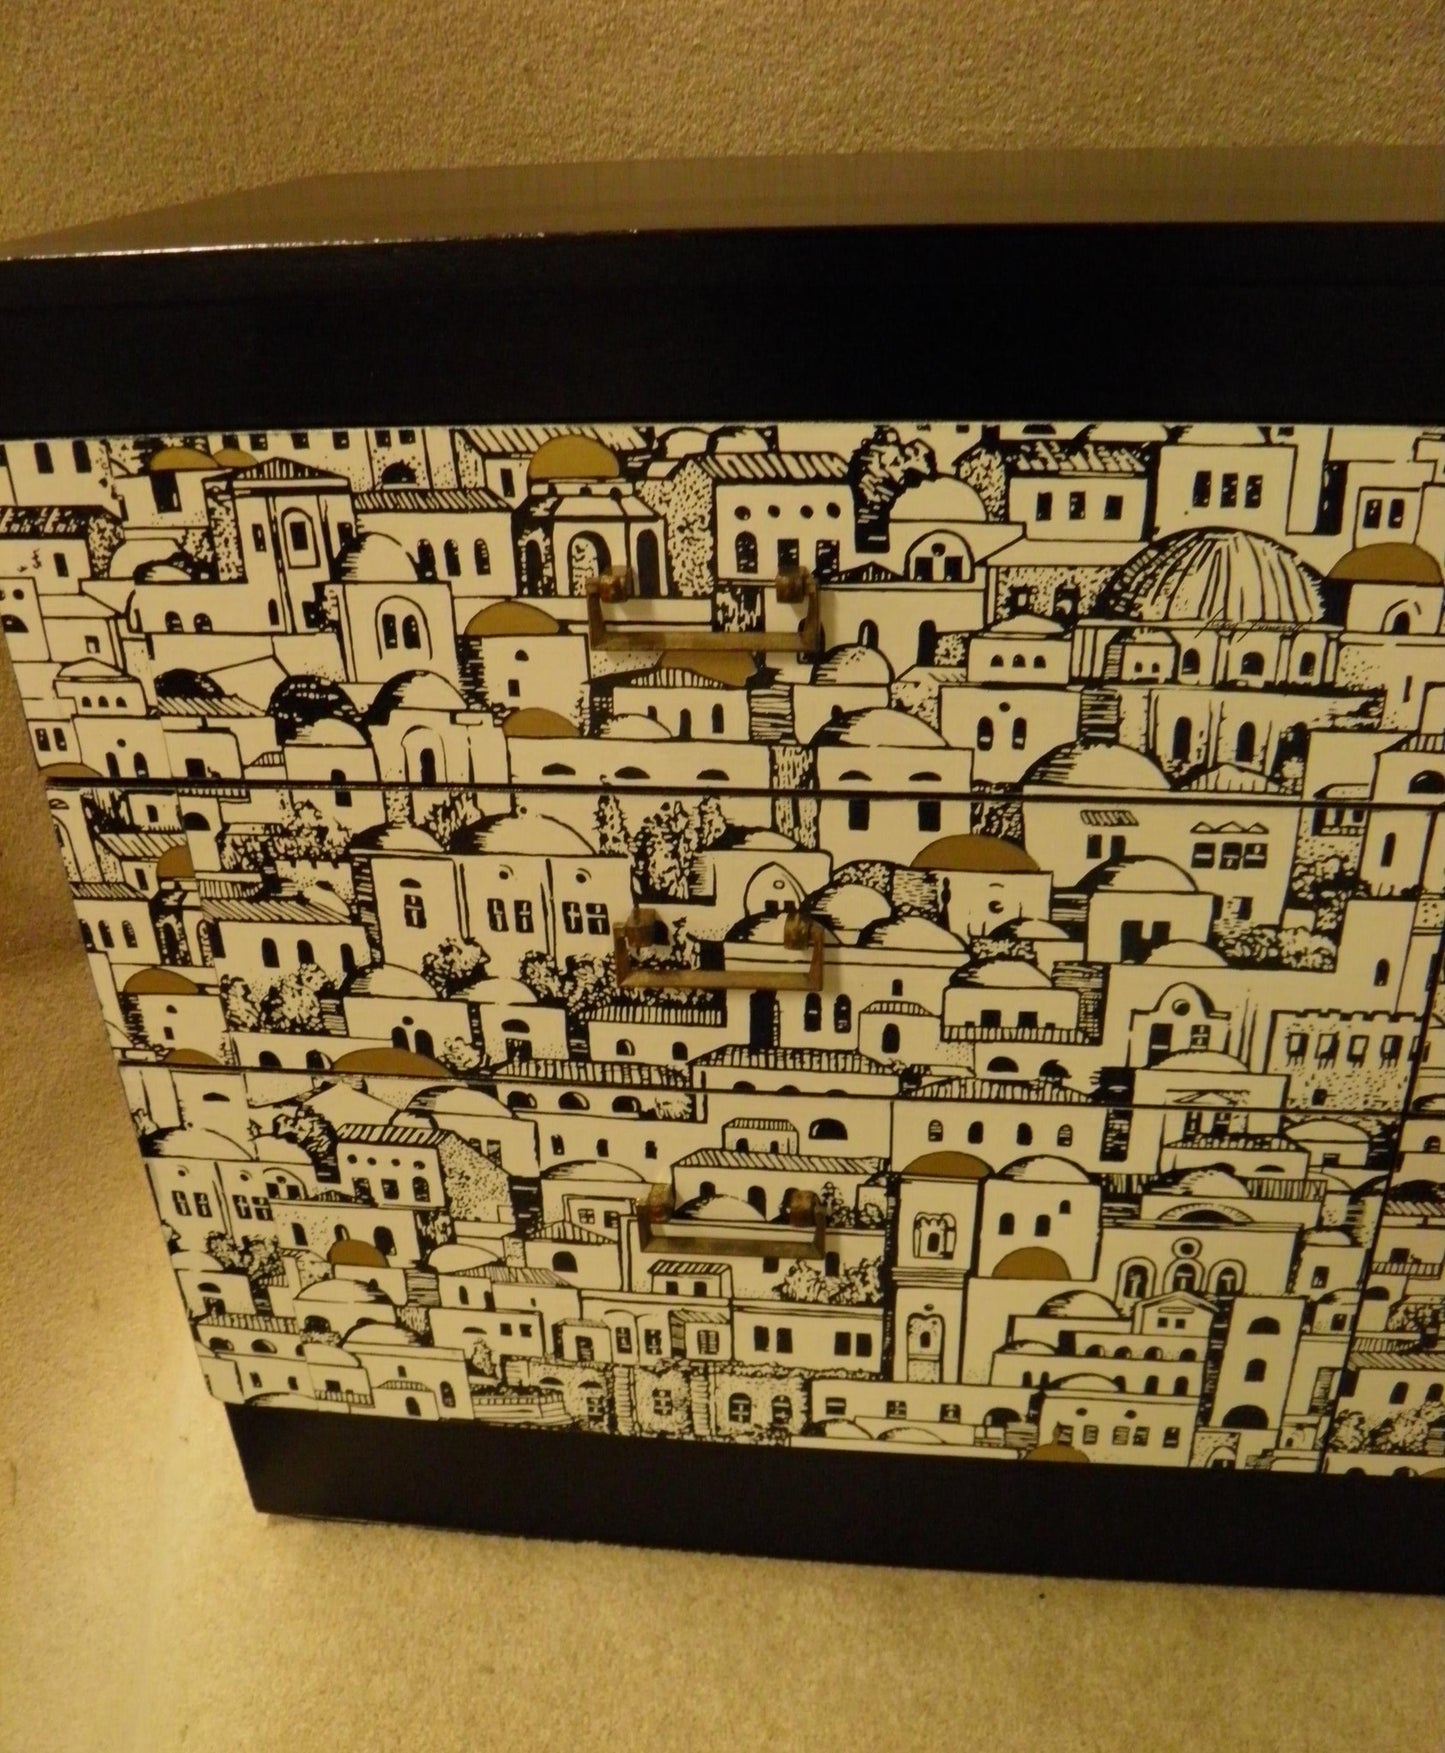 Fabulous Fornasetti Style Retro Chest Of Drawers.